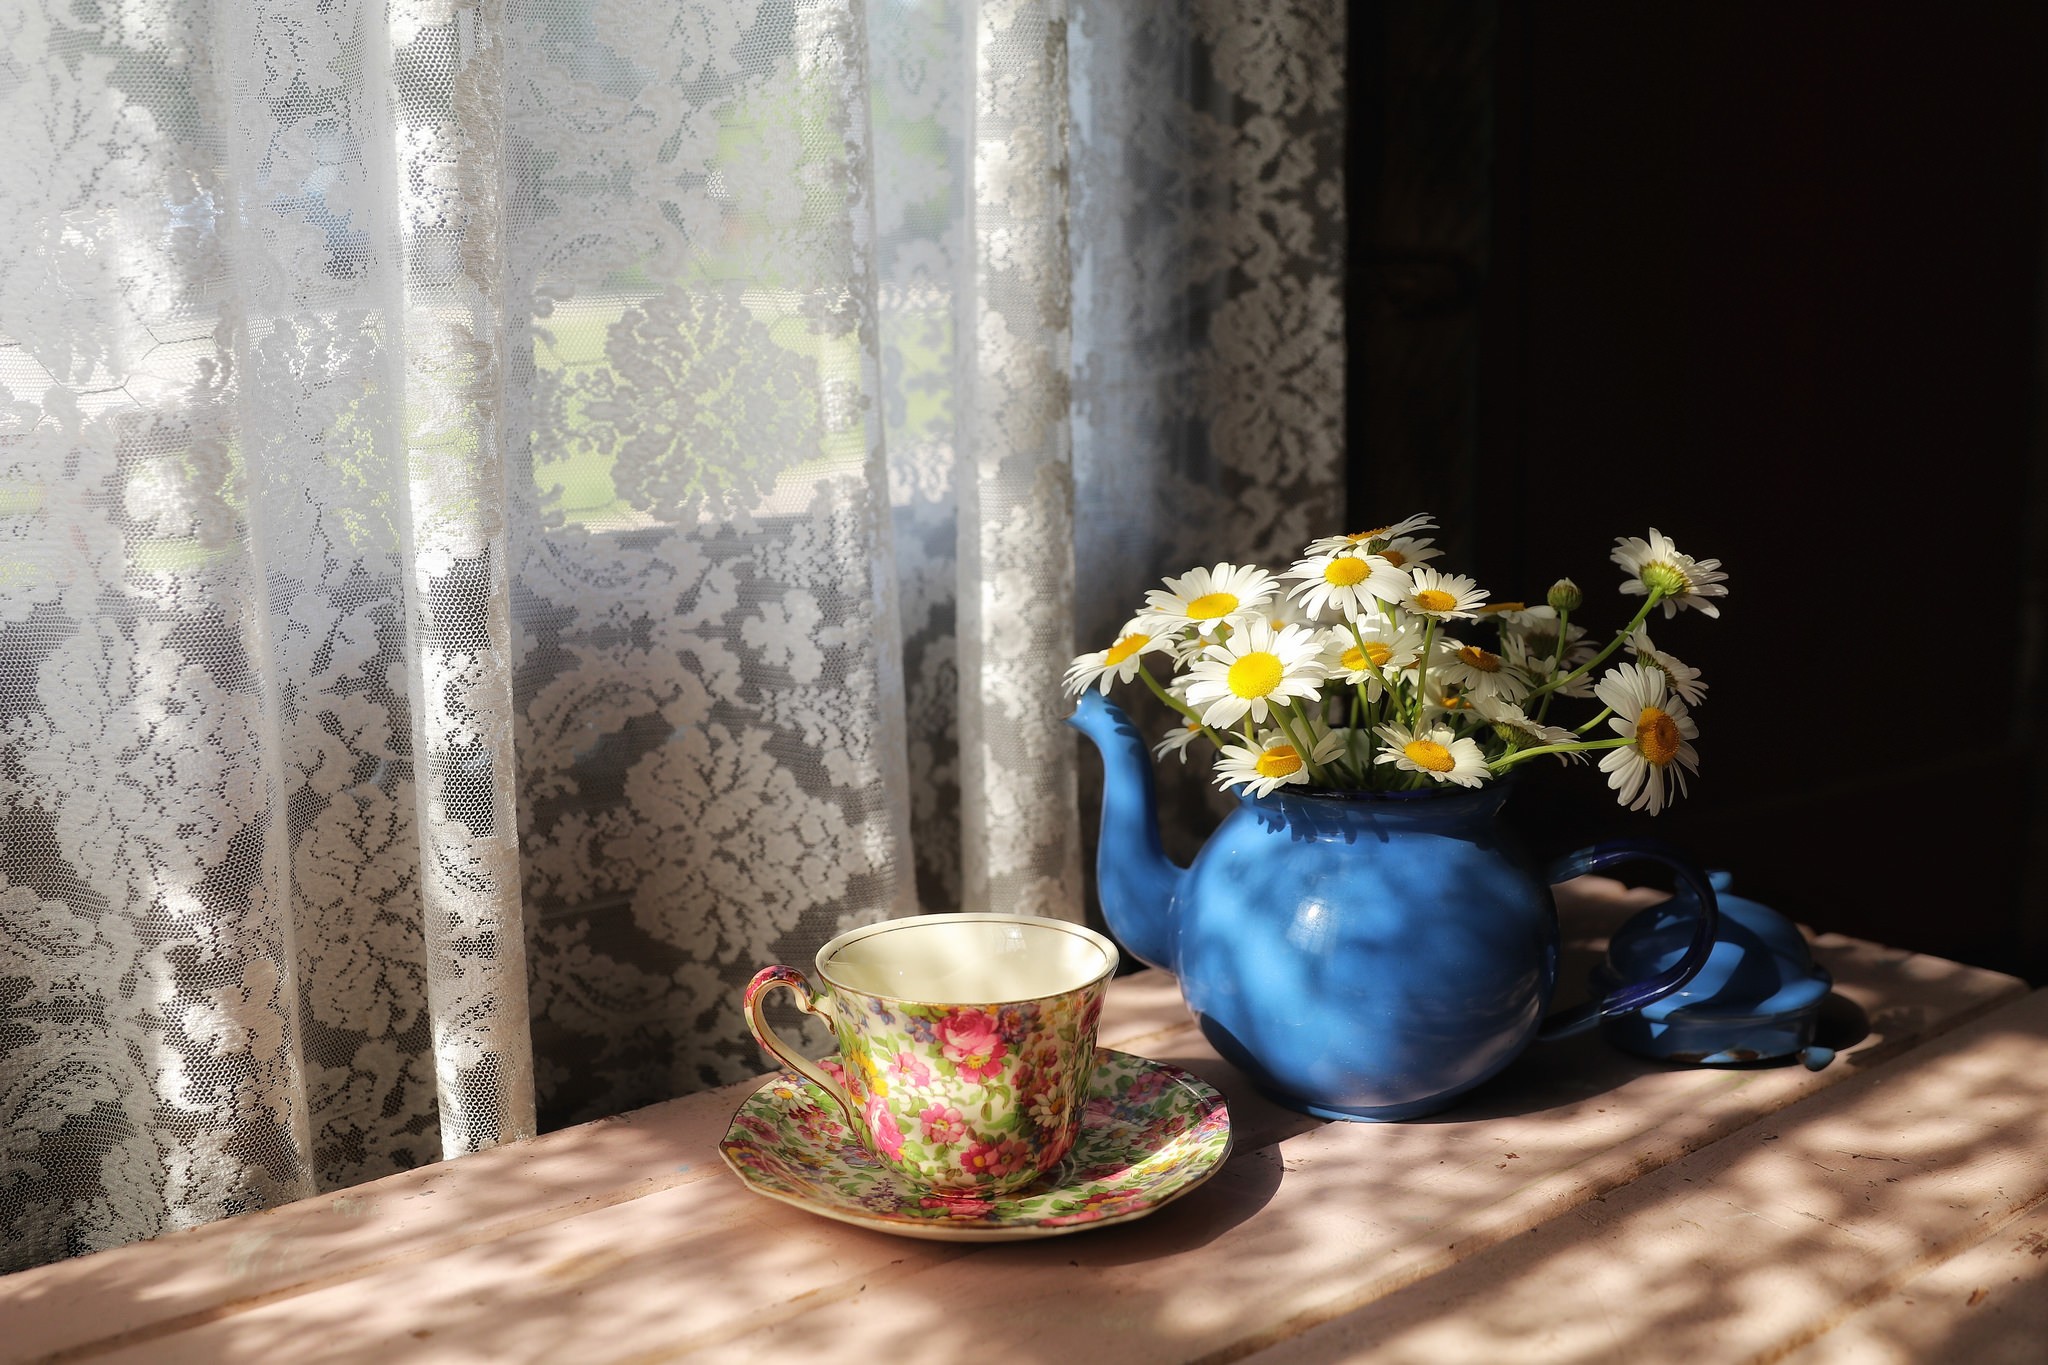 General 2048x1365 curtains flowers cup still life indoors